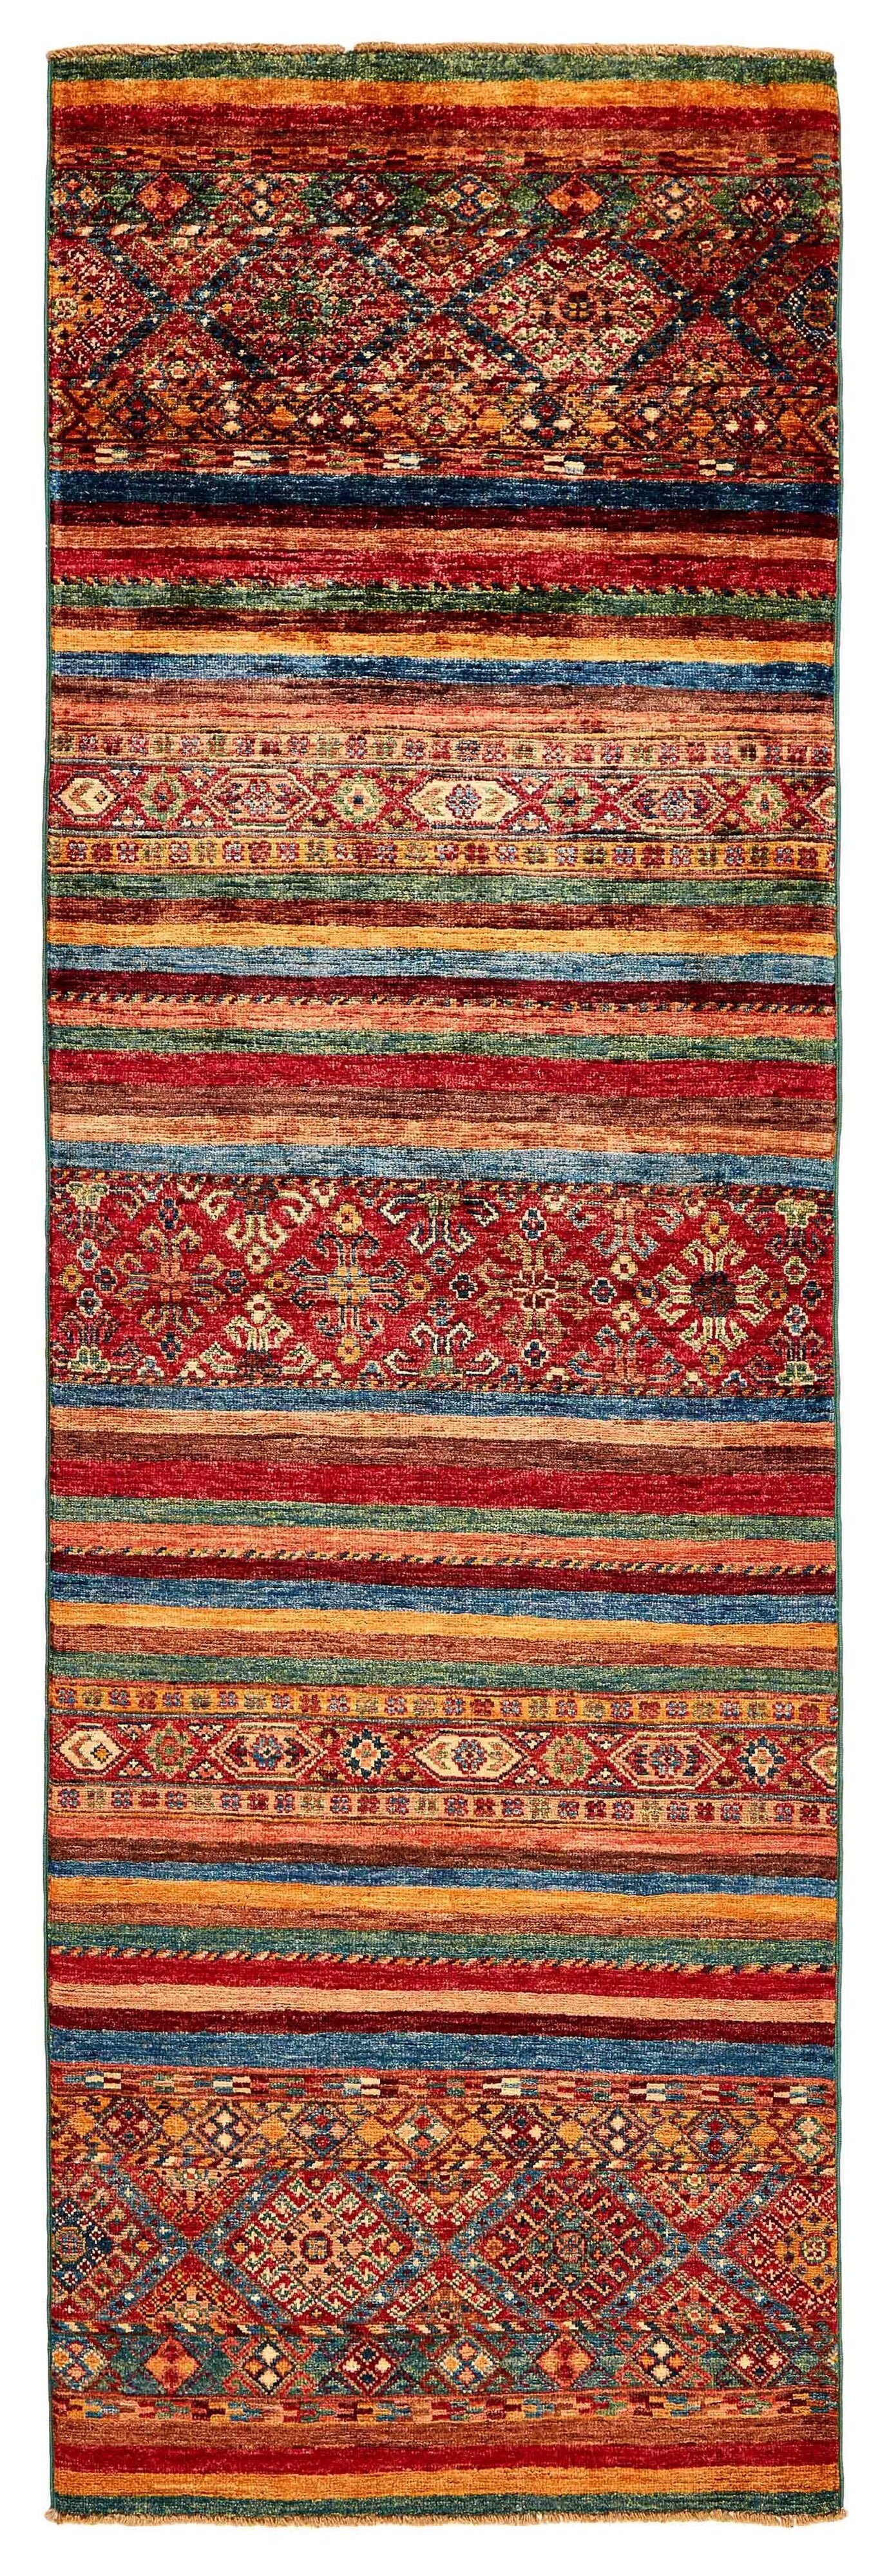 Authentic oriental runner with traditional pattern in red, pink, orange, yellow, blue, green, beige and brown